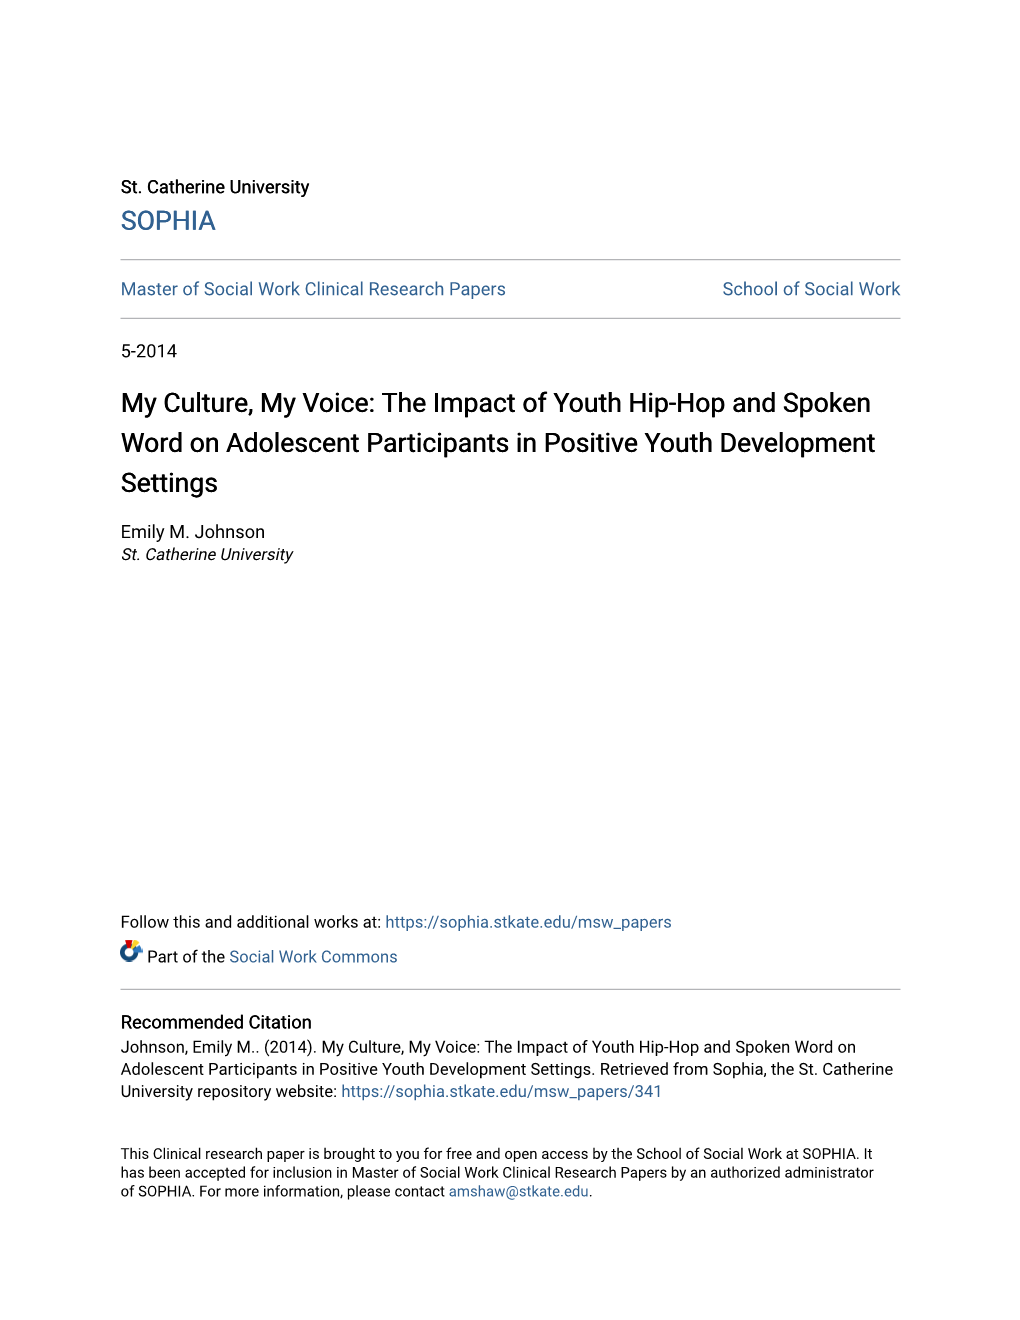 The Impact of Youth Hip-Hop and Spoken Word on Adolescent Participants in Positive Youth Development Settings